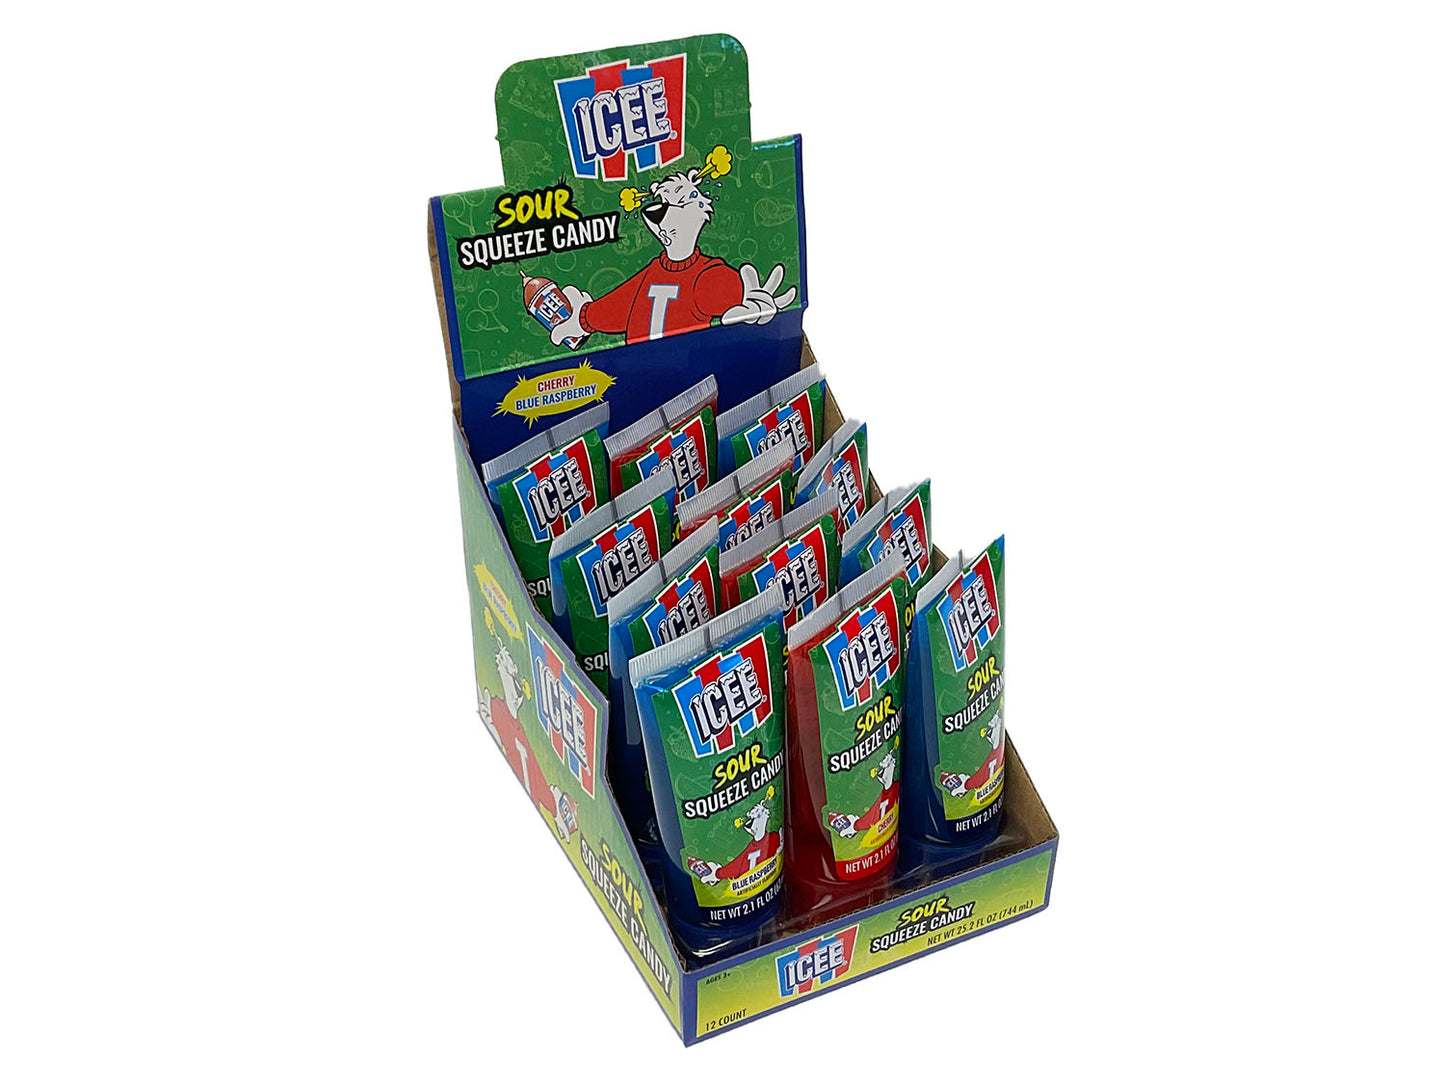 ICEE Sour Squeeze Candy - 2.1 oz tube box of 12